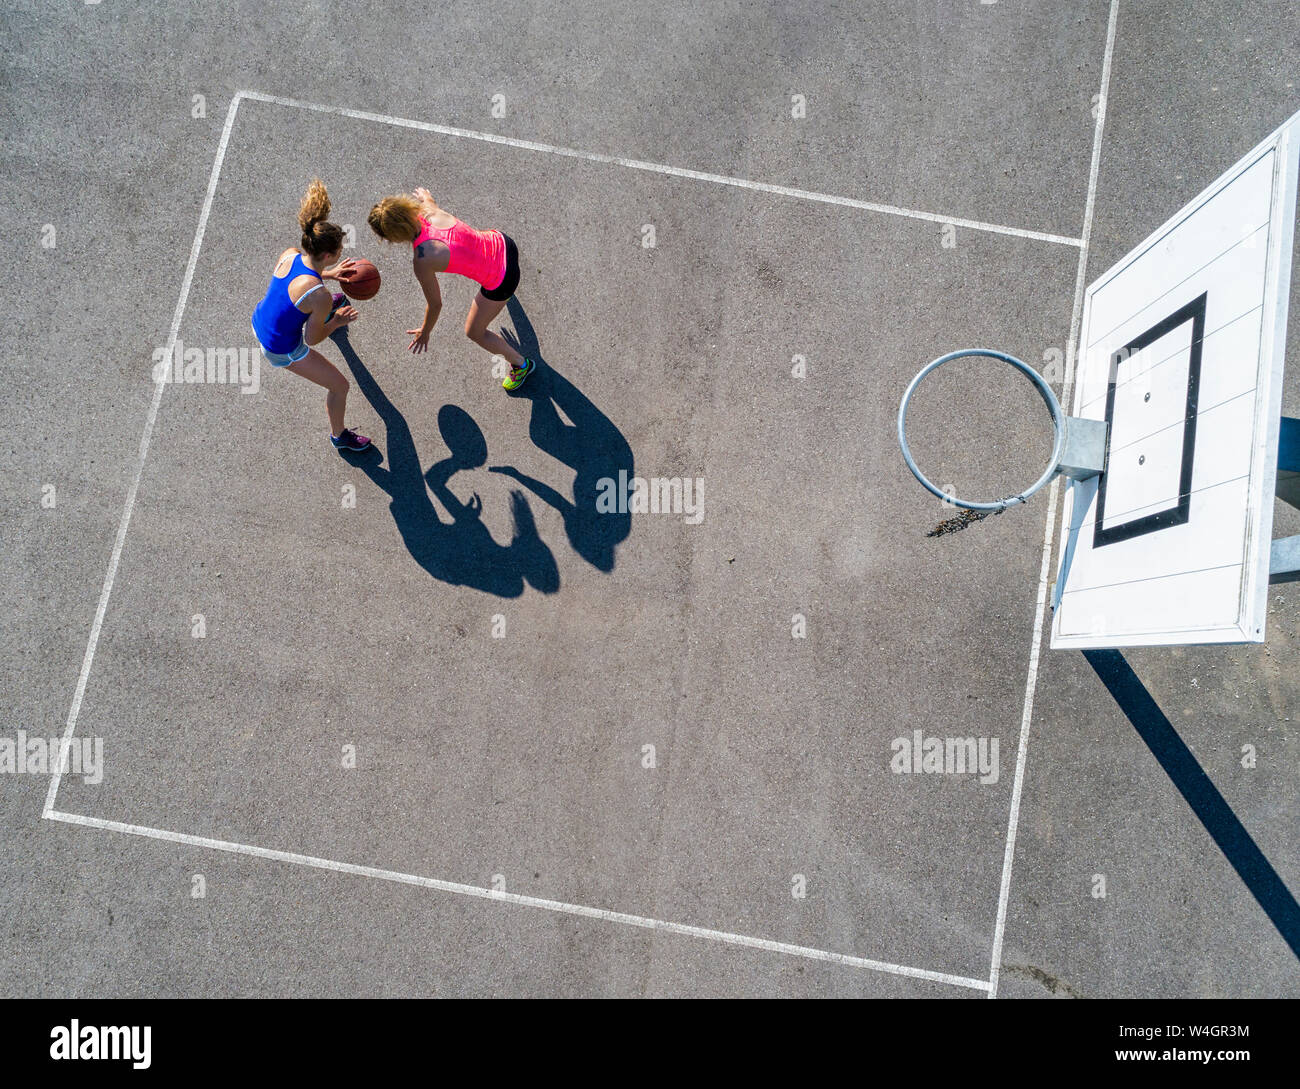 Young women playing basketball, aerial view Stock Photo